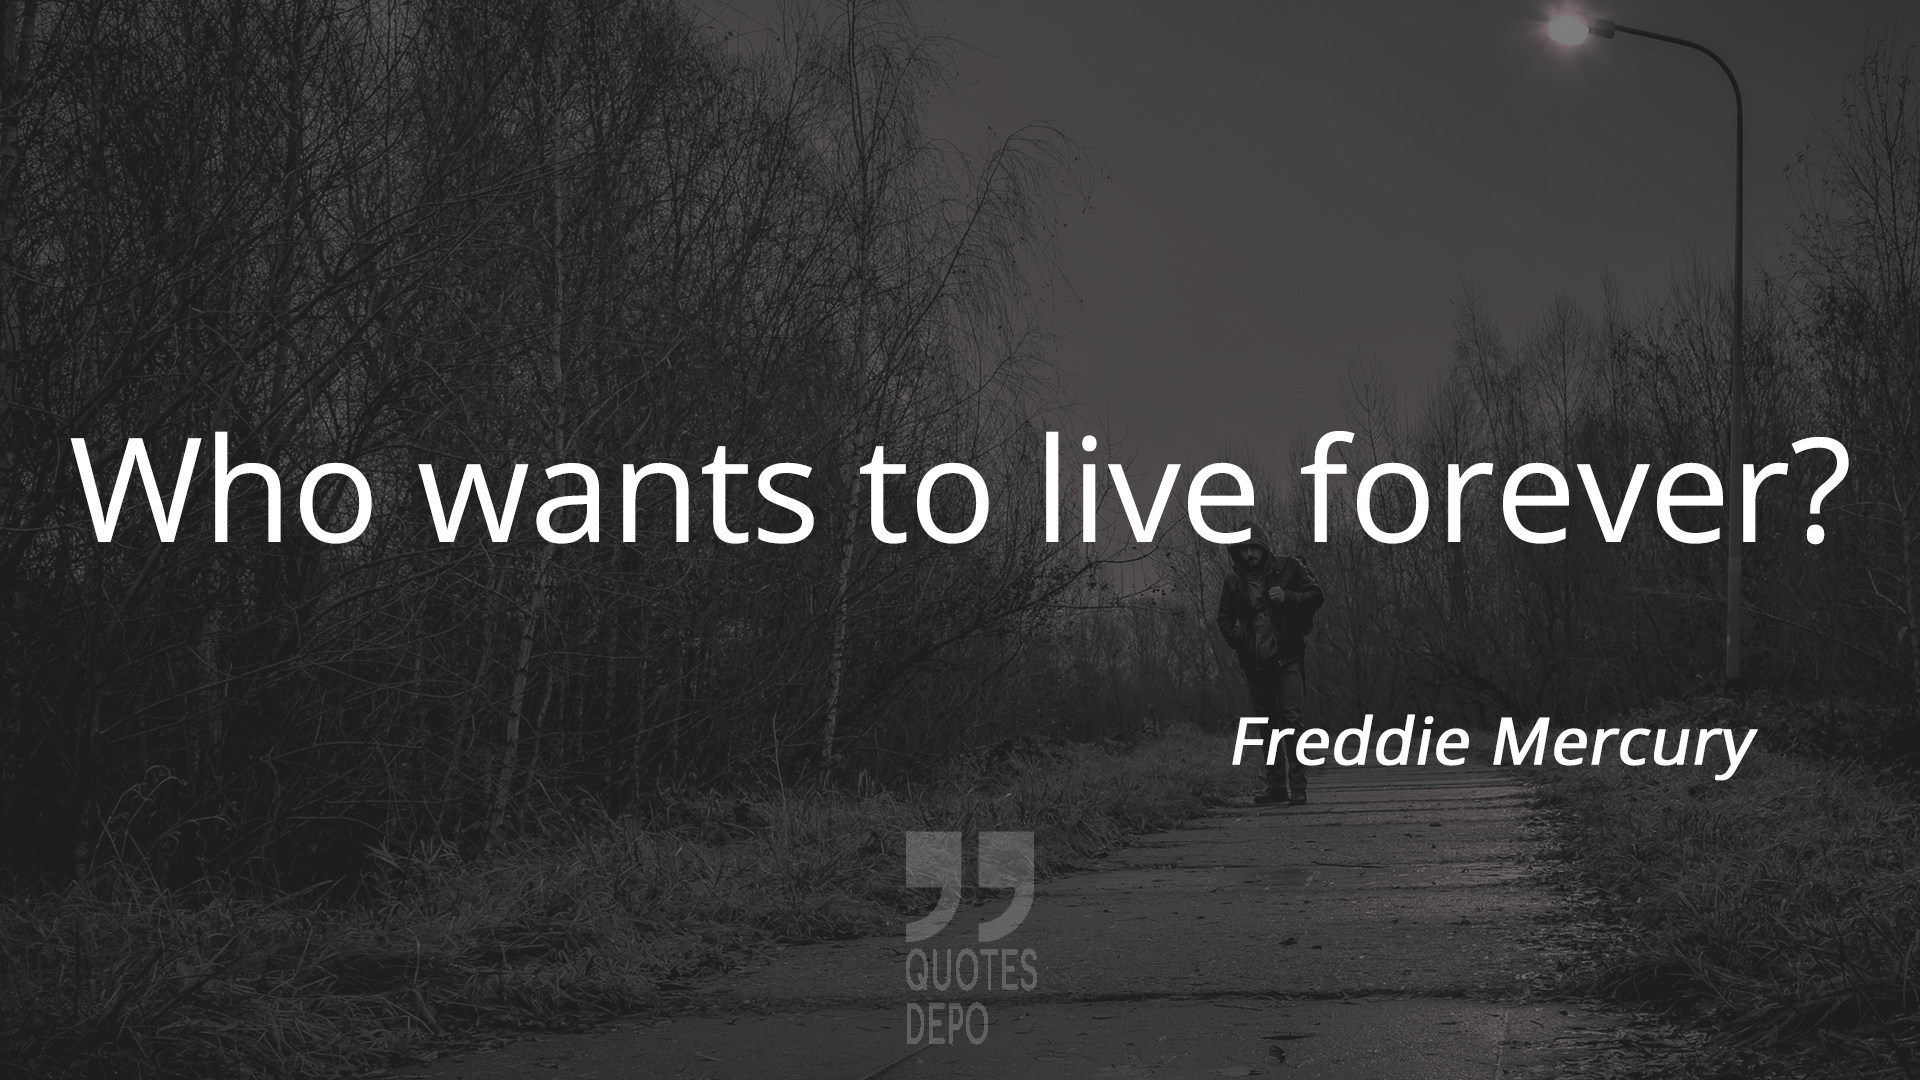 who wants to live forever - freddie mercury quotes